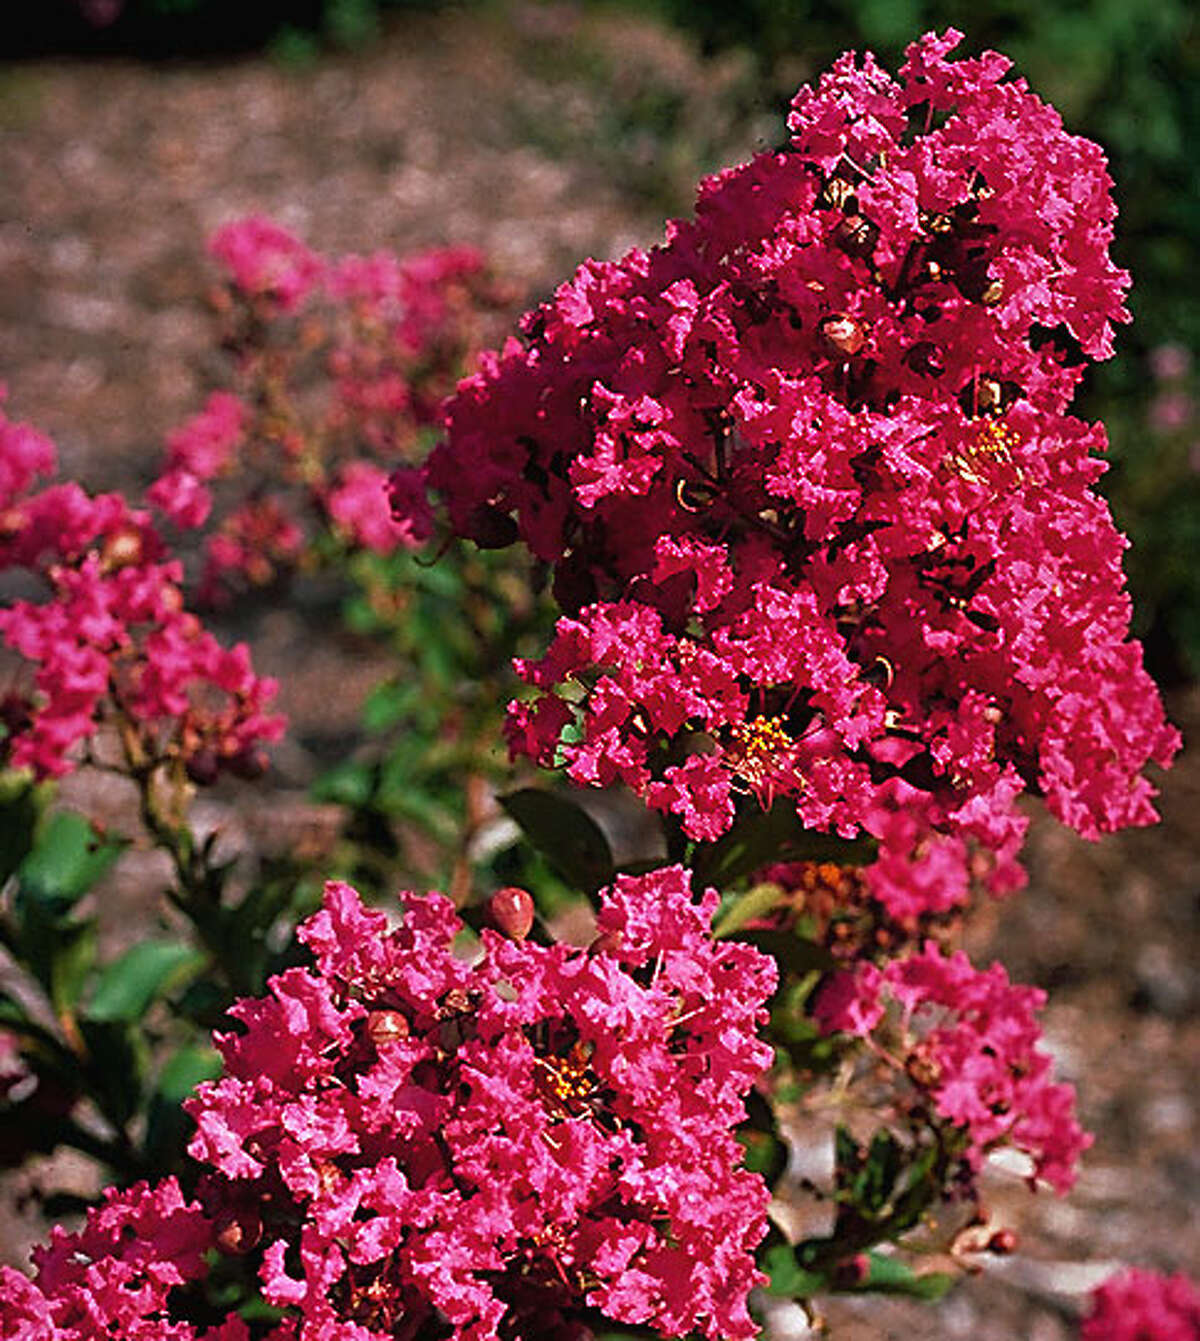 Boost blooming for crape myrtles by removing bloom spikes when half have lost color.